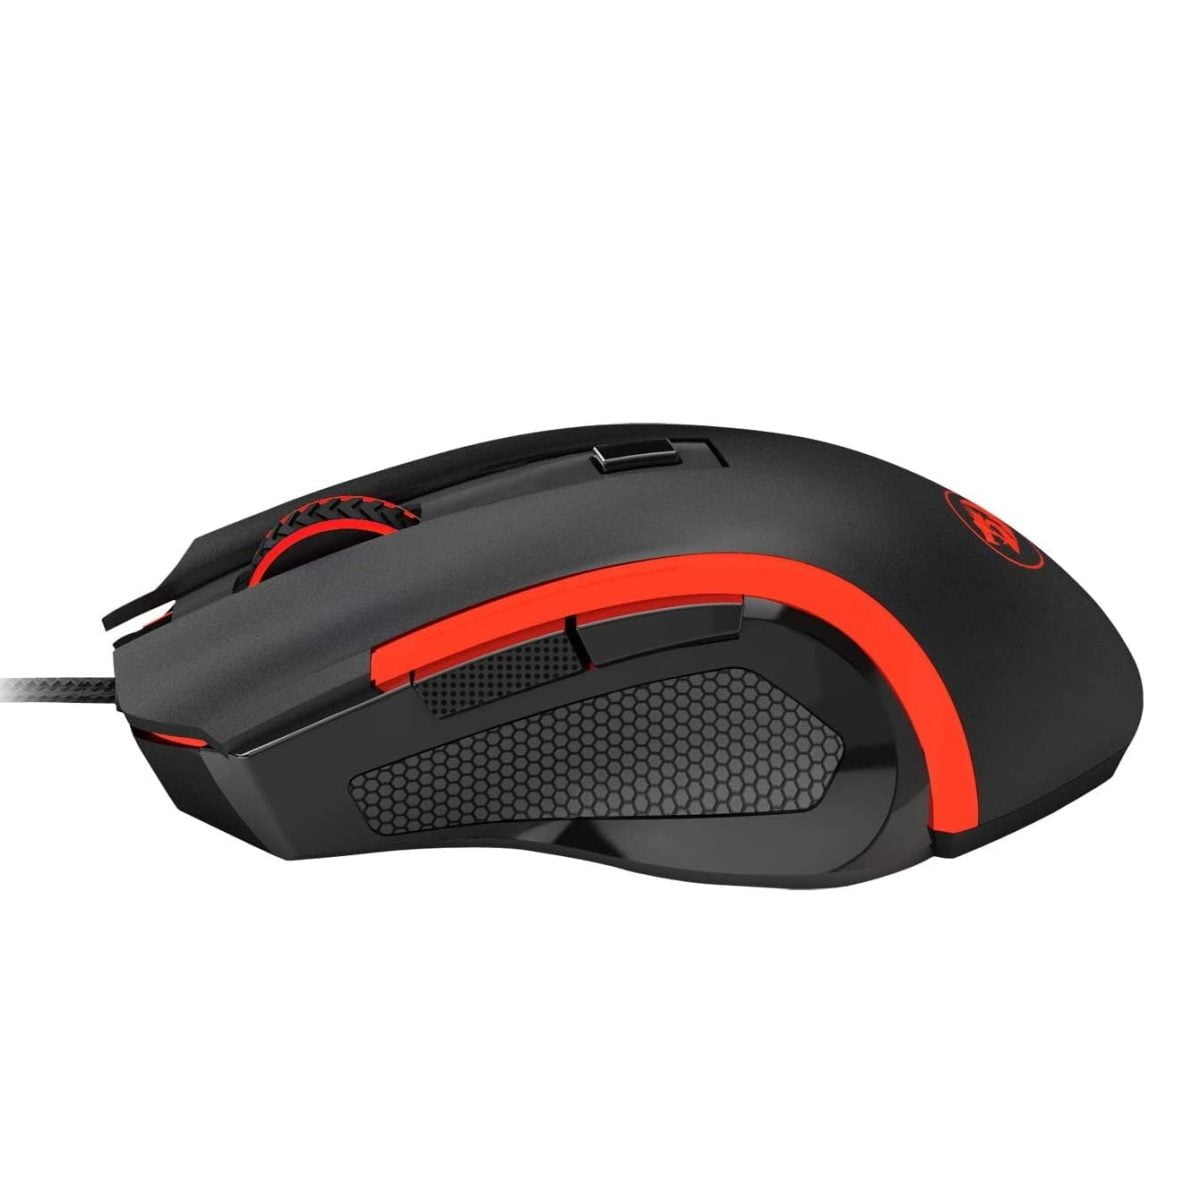 61Lfrbultfl. Ac Sl1500 Redragon &Lt;H1 Id=&Quot;Title&Quot; Class=&Quot;A-Size-Large A-Spacing-None&Quot;&Gt;Redragon M606 Nothosaur Usb Gaming Mouse&Lt;/H1&Gt; &Lt;Table Class=&Quot;A-Normal A-Spacing-Micro&Quot;&Gt; &Lt;Tbody&Gt; &Lt;Tr Class=&Quot;A-Spacing-Small Po-Connectivity_Technology&Quot;&Gt; &Lt;Td Class=&Quot;A-Span3&Quot;&Gt;&Lt;Span Class=&Quot;A-Size-Base A-Text-Bold&Quot;&Gt;Connectivity Technology&Lt;/Span&Gt;&Lt;/Td&Gt; &Lt;Td Class=&Quot;A-Span9&Quot;&Gt;&Lt;Span Class=&Quot;A-Size-Base&Quot;&Gt;Usb&Lt;/Span&Gt;&Lt;/Td&Gt; &Lt;/Tr&Gt; &Lt;Tr Class=&Quot;A-Spacing-Small Po-Recommended_Uses_For_Product&Quot;&Gt; &Lt;Td Class=&Quot;A-Span3&Quot;&Gt;&Lt;Span Class=&Quot;A-Size-Base A-Text-Bold&Quot;&Gt;Recommended Uses For Product&Lt;/Span&Gt;&Lt;/Td&Gt; &Lt;Td Class=&Quot;A-Span9&Quot;&Gt;&Lt;Span Class=&Quot;A-Size-Base&Quot;&Gt;Gaming&Lt;/Span&Gt;&Lt;/Td&Gt; &Lt;/Tr&Gt; &Lt;Tr Class=&Quot;A-Spacing-Small Po-Brand&Quot;&Gt; &Lt;Td Class=&Quot;A-Span3&Quot;&Gt;&Lt;Span Class=&Quot;A-Size-Base A-Text-Bold&Quot;&Gt;Brand&Lt;/Span&Gt;&Lt;/Td&Gt; &Lt;Td Class=&Quot;A-Span9&Quot;&Gt;&Lt;Span Class=&Quot;A-Size-Base&Quot;&Gt;Redragon&Lt;/Span&Gt;&Lt;/Td&Gt; &Lt;/Tr&Gt; &Lt;Tr Class=&Quot;A-Spacing-Small Po-Movement_Detection_Technology&Quot;&Gt; &Lt;Td Class=&Quot;A-Span3&Quot;&Gt;&Lt;Span Class=&Quot;A-Size-Base A-Text-Bold&Quot;&Gt;Movement Detection Technology&Lt;/Span&Gt;&Lt;/Td&Gt; &Lt;Td Class=&Quot;A-Span9&Quot;&Gt;&Lt;Span Class=&Quot;A-Size-Base&Quot;&Gt;Optical&Lt;/Span&Gt;&Lt;/Td&Gt; &Lt;/Tr&Gt; &Lt;Tr Class=&Quot;A-Spacing-Small Po-Color&Quot;&Gt; &Lt;Td Class=&Quot;A-Span3&Quot;&Gt;&Lt;Span Class=&Quot;A-Size-Base A-Text-Bold&Quot;&Gt;Colour&Lt;/Span&Gt;&Lt;/Td&Gt; &Lt;Td Class=&Quot;A-Span9&Quot;&Gt;&Lt;Span Class=&Quot;A-Size-Base&Quot;&Gt;Black&Lt;/Span&Gt;&Lt;/Td&Gt; &Lt;/Tr&Gt; &Lt;/Tbody&Gt; &Lt;/Table&Gt; Gaming Mouse Redragon M606 Gaming Mouse